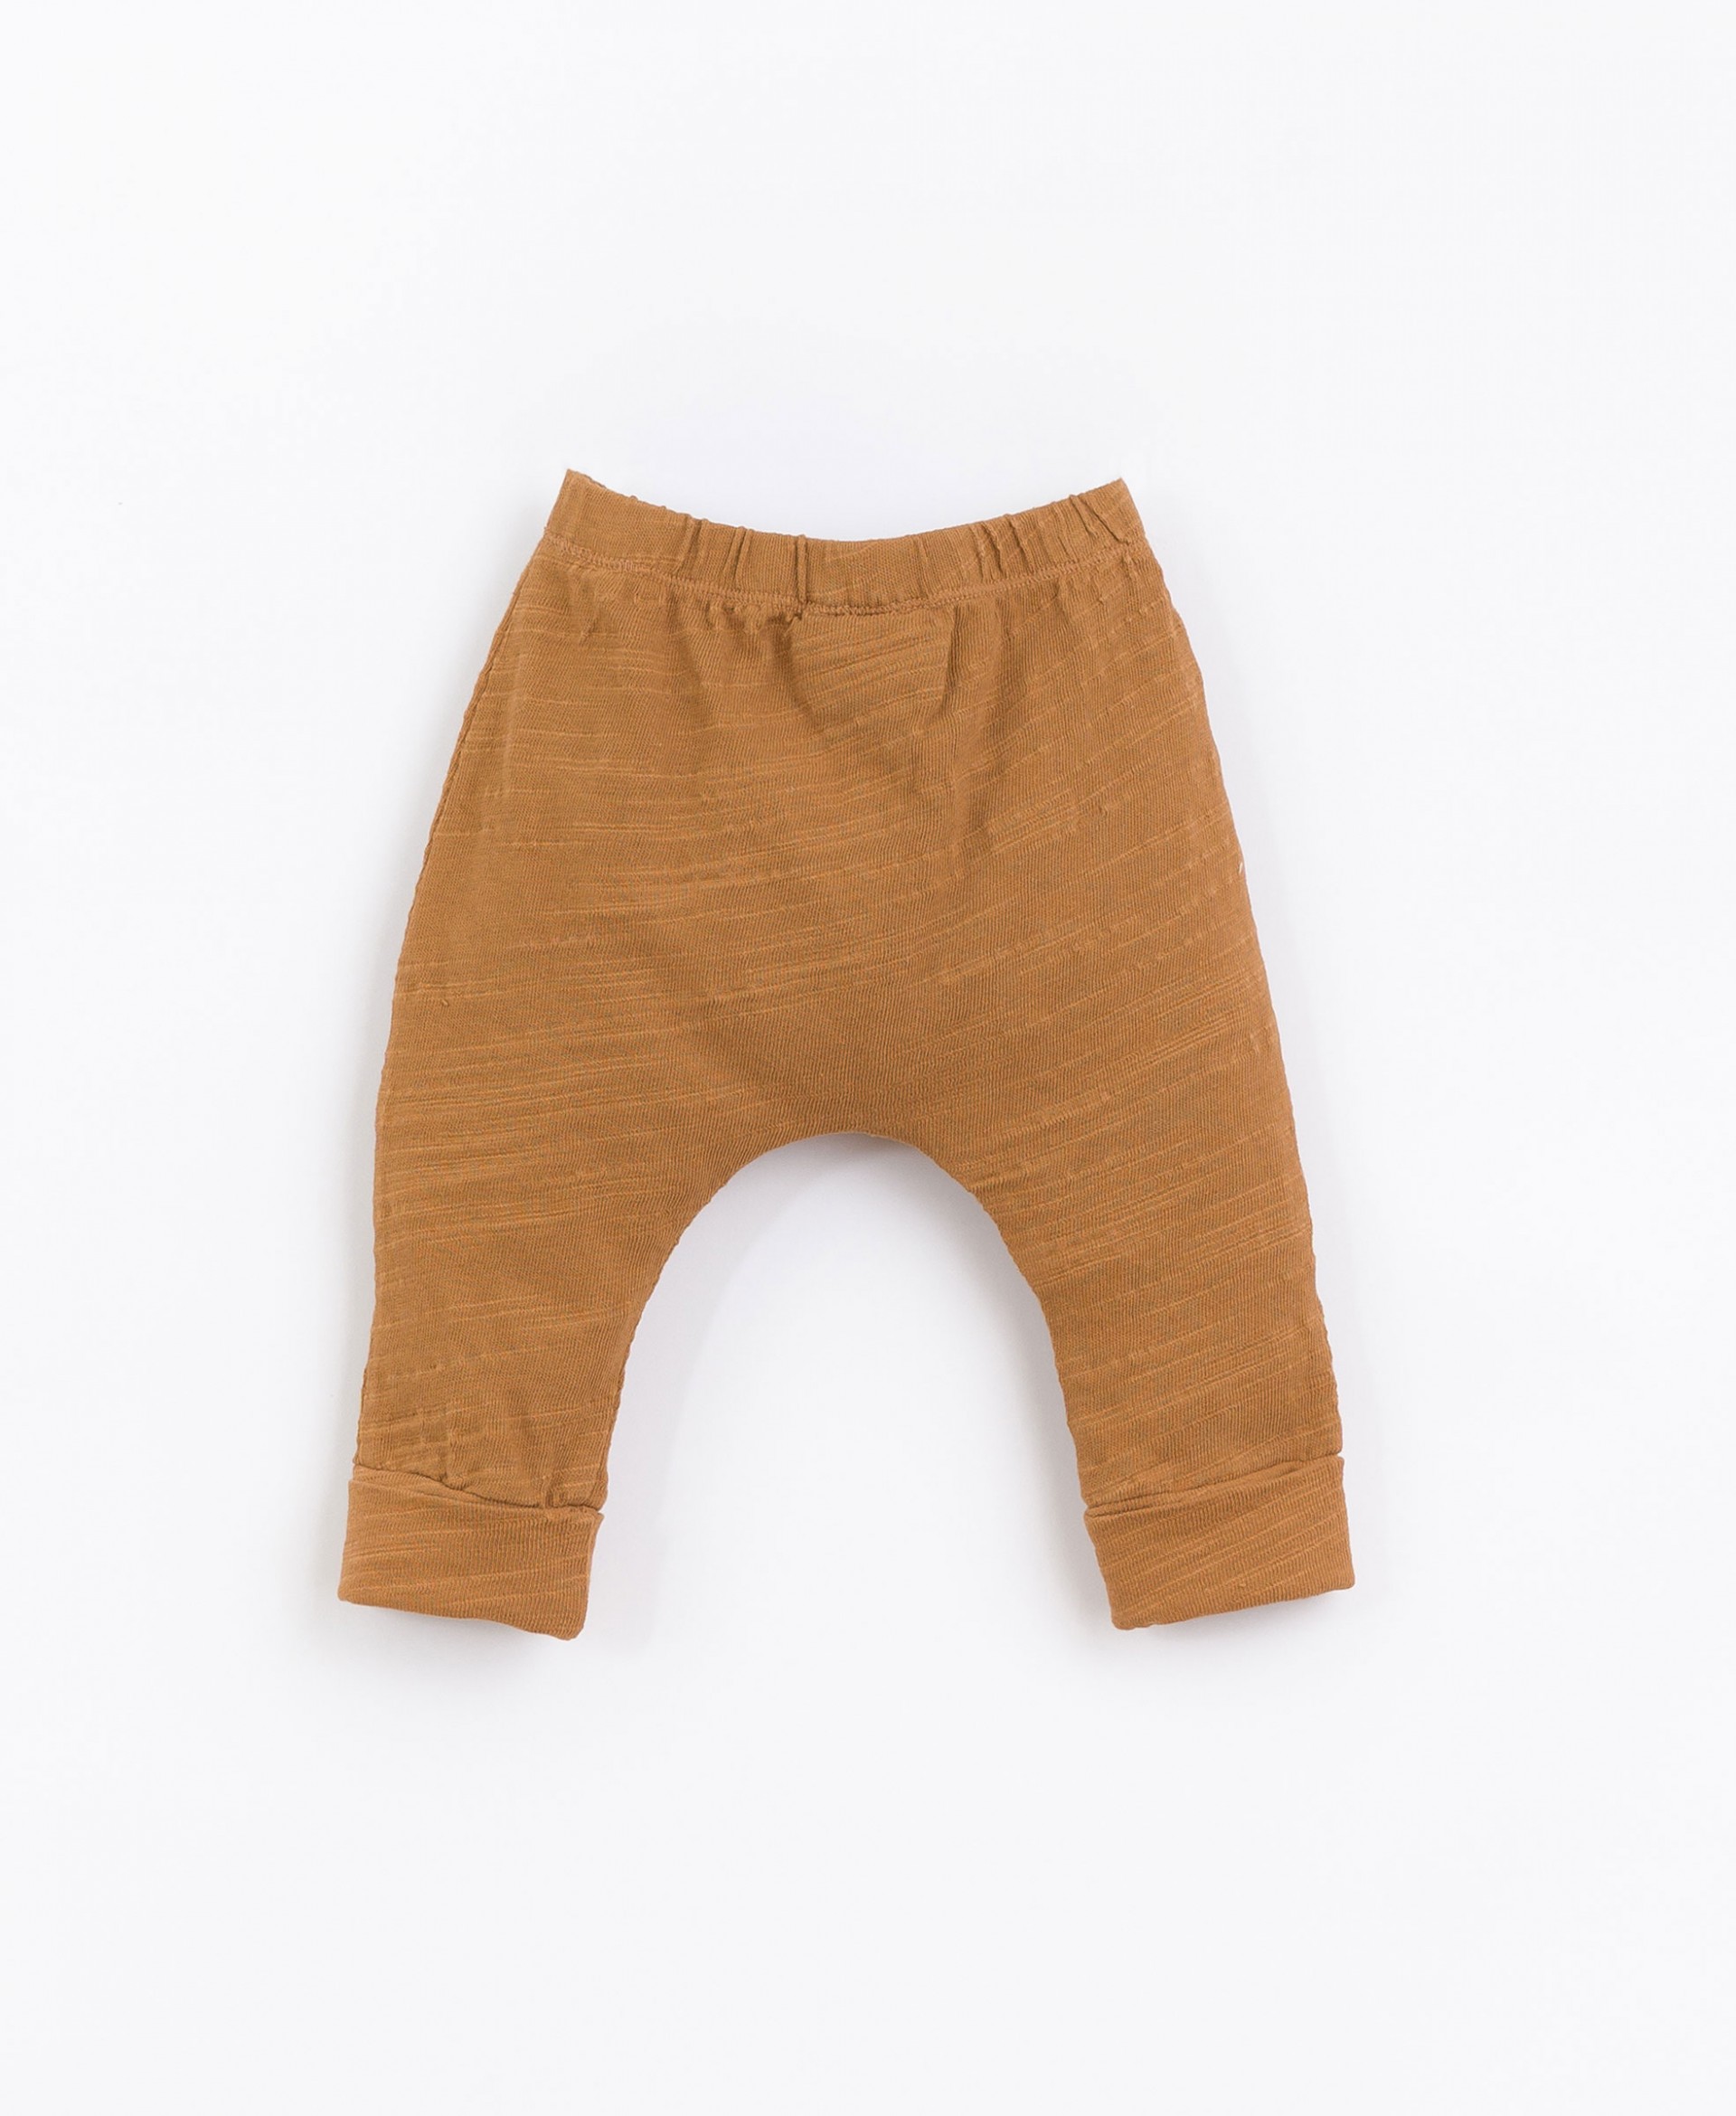 Pants in blend of organic cotton and recycled cotton| Basketry